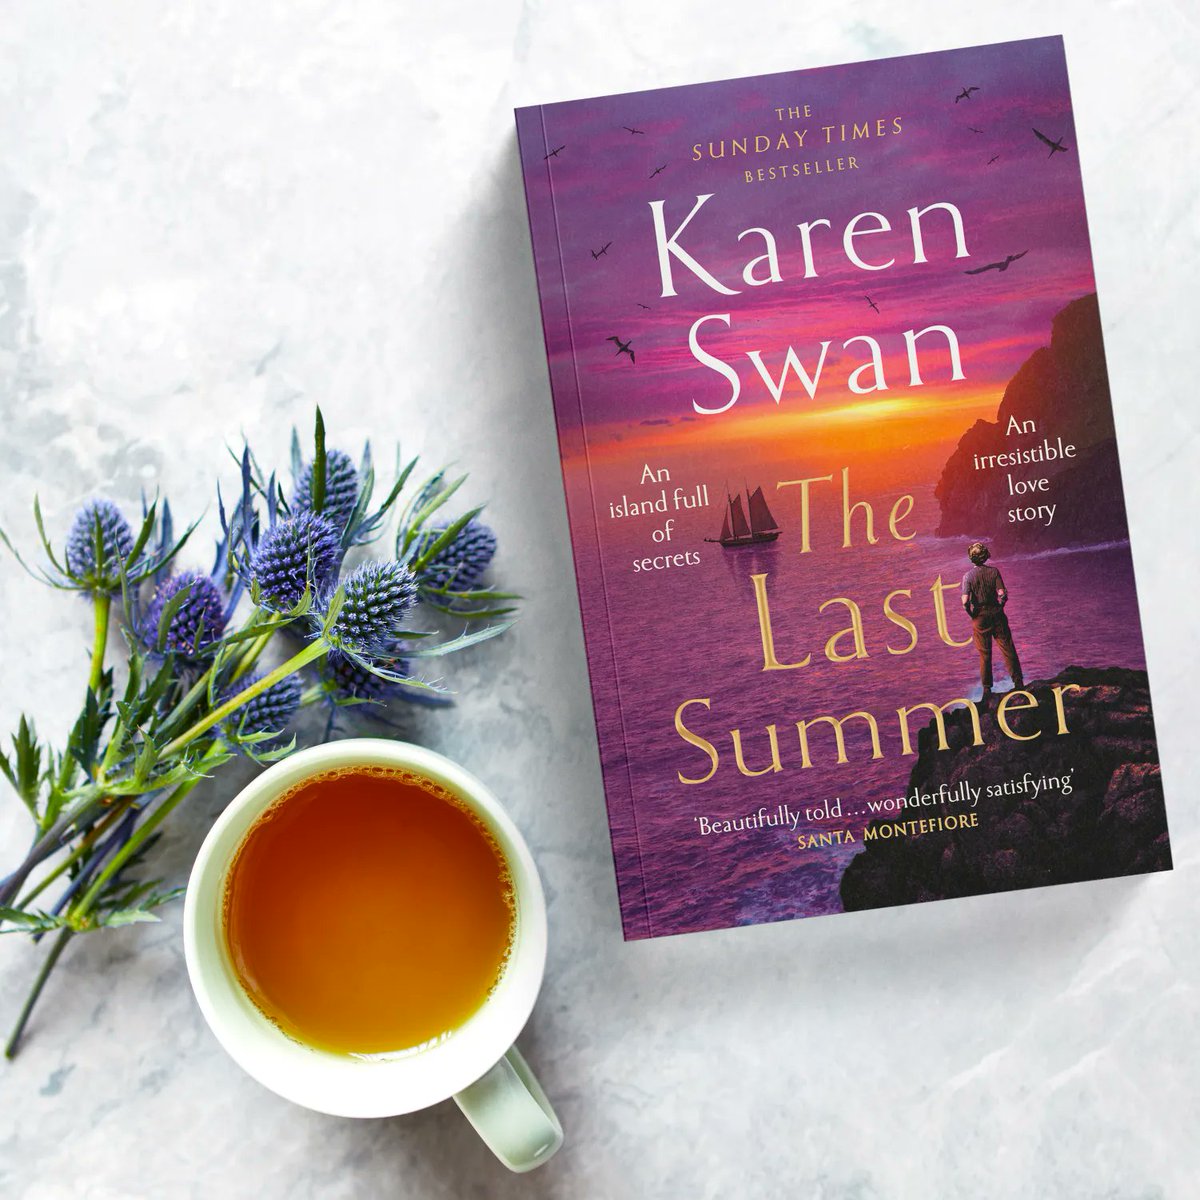 'The most exciting, enchanting and evocative story of forbidden love I've ever read' ✨ Huge thanks to @CathyBramley for this glowing endorsement of #TheLastSummer by @KarenSwan1! Lose yourself on the Wild Isle in this epic romance. Out now in paperback: buff.ly/43PT1ia